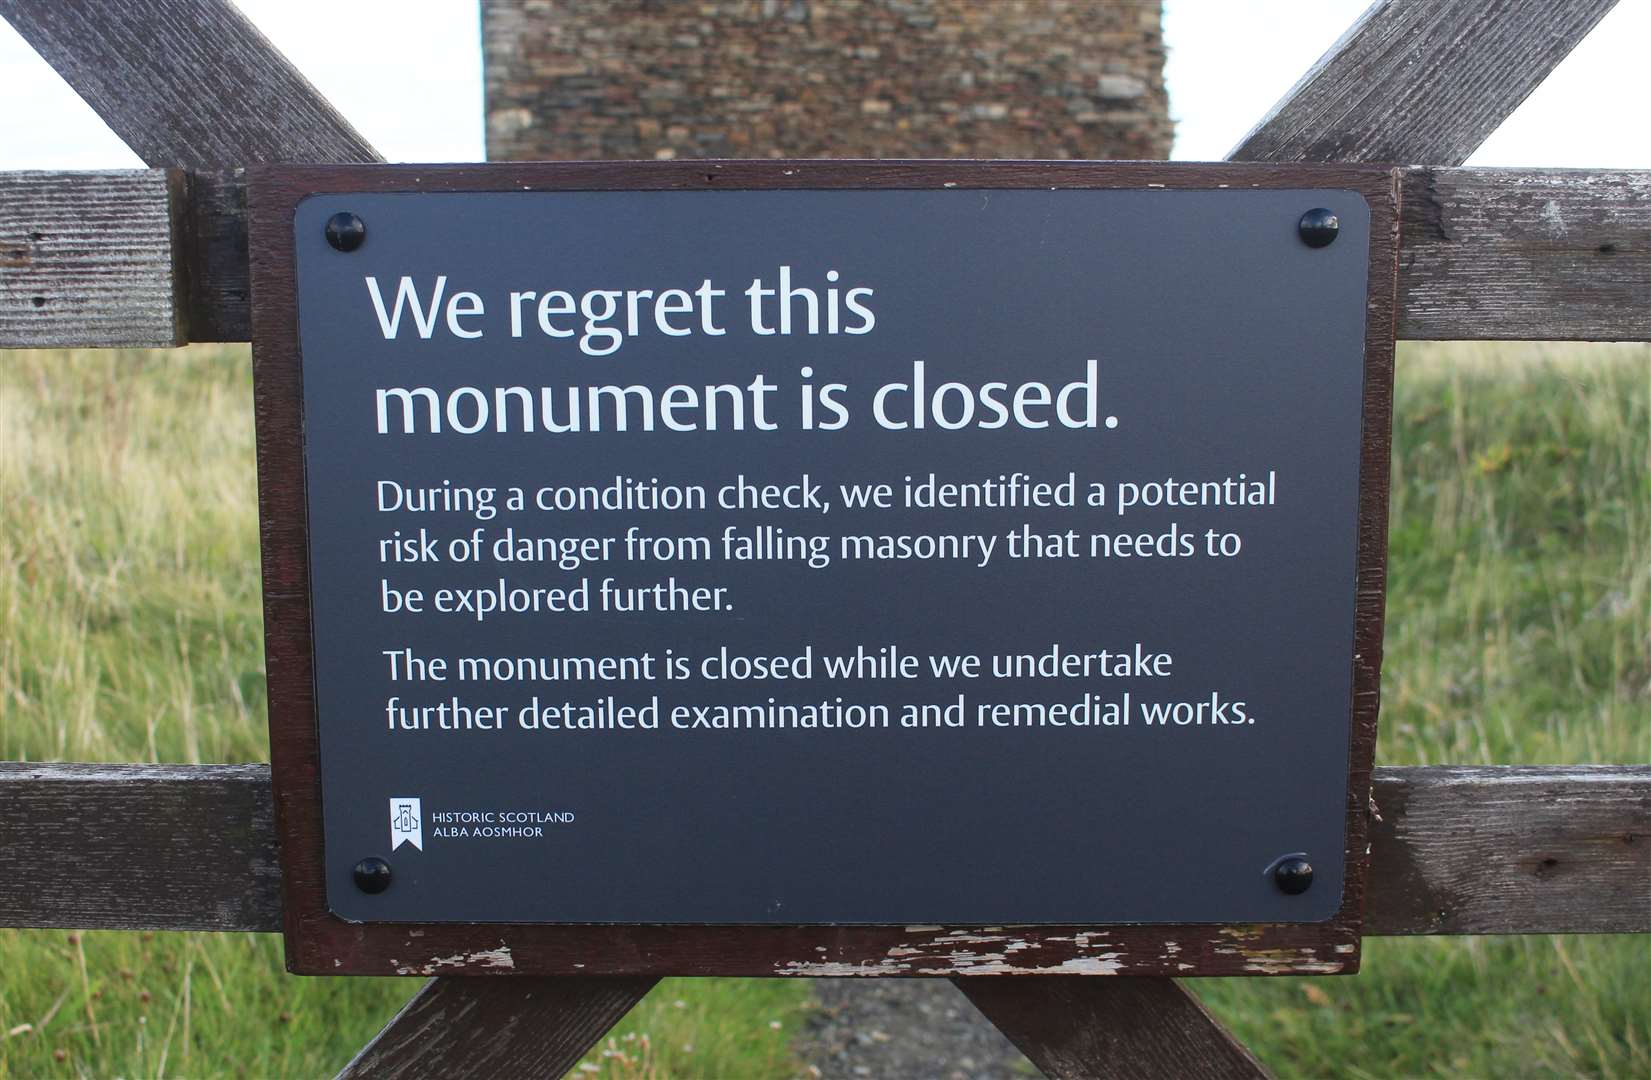 A sign attached to the wooden gate at the entrance to the castle site.